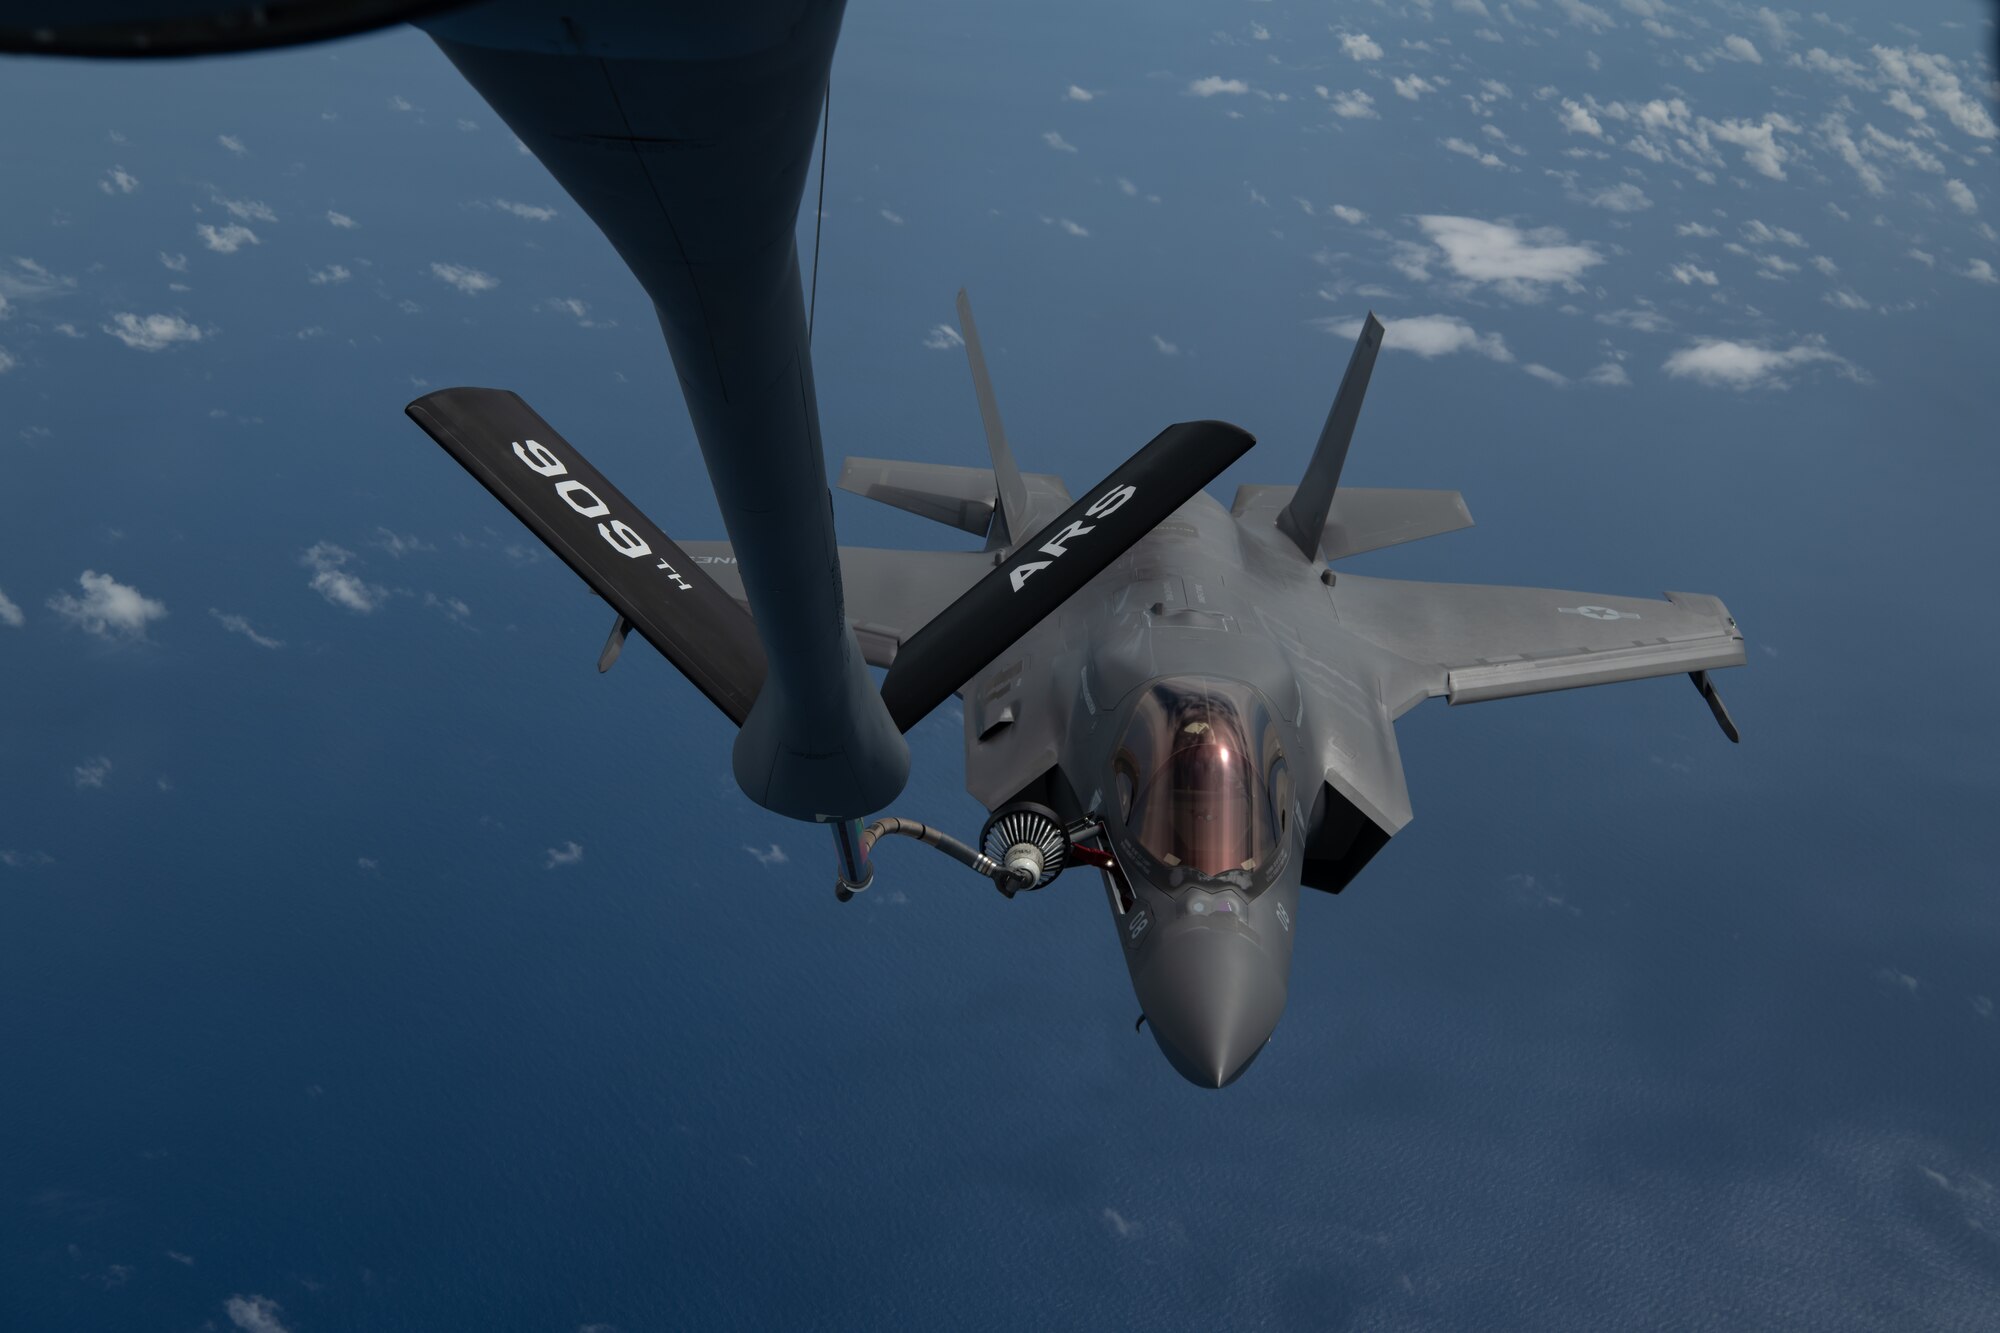 A U.S. Marine Corps F-35B Lightning II Marine Fighter Attack Squadron based out of Marine Corps Air Station MCAS Iwakuni, Japan receives fuel from a from a KC-135 Stratotanker assigned to the 909th Air Refueling Squadron, Kadena Air Base, Japan during a Large Scale Global Exercise 21 mission over the western Pacific Ocean, Aug. 18, 2021. The U.S. has the ability to operate from the sanctuary of bases across the region and projecting sustained combat power.  (U.S. Air Force photo by Tech. Sgt. Micaiah Anthony)